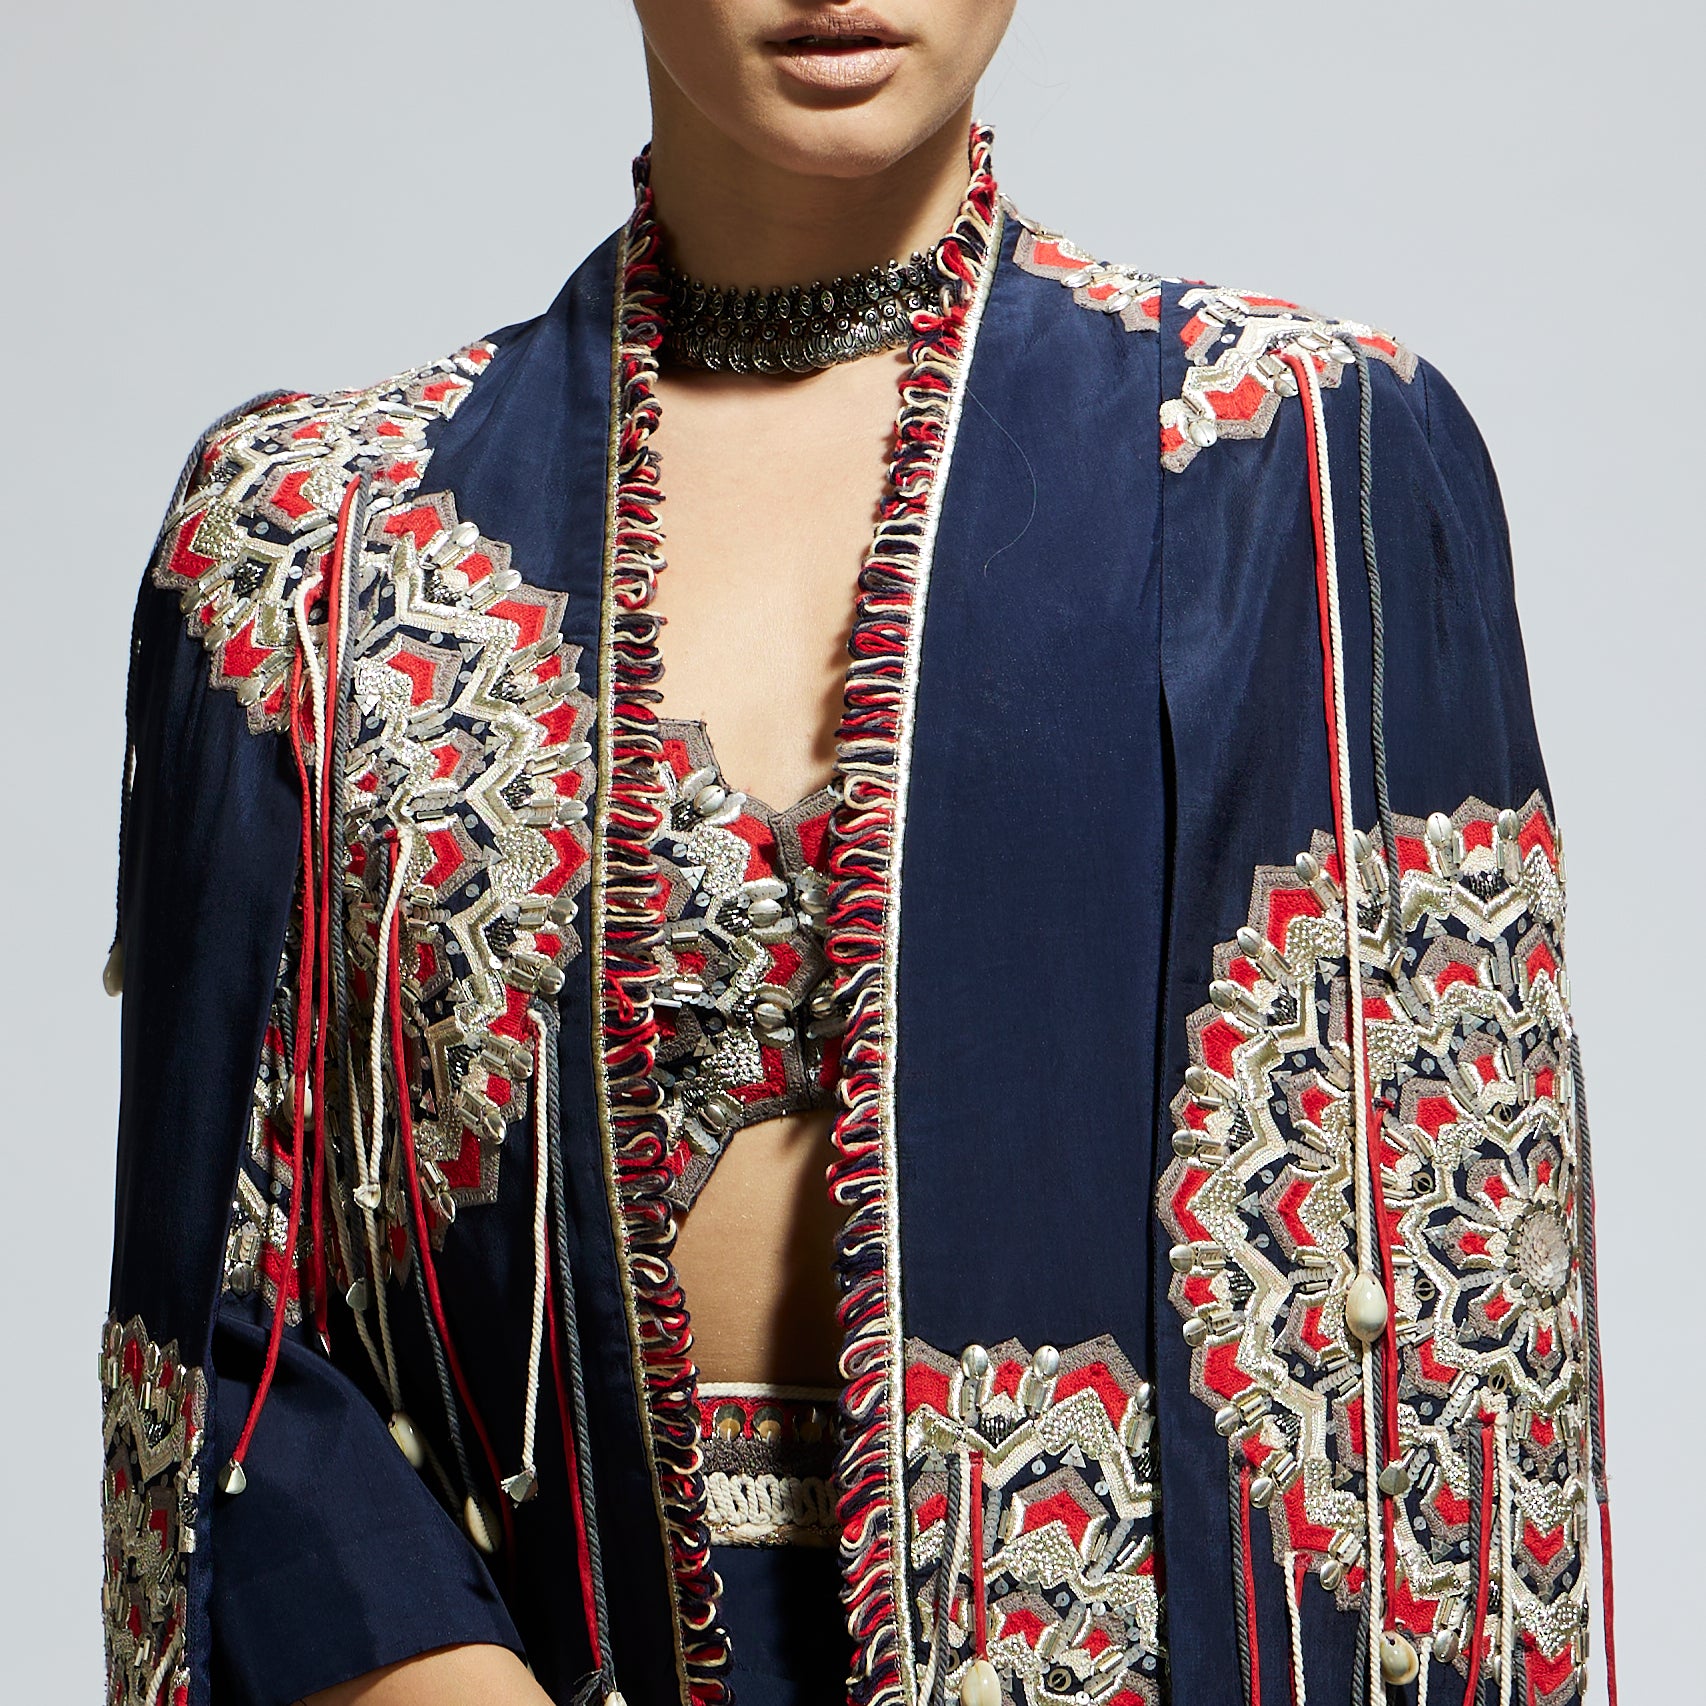 BLUE ASYMETRIC THREADWORK CAPE JACKET PAIRED WITH AN EMBELLISHED BUSTIER AND HIGH SLIT SKIRT